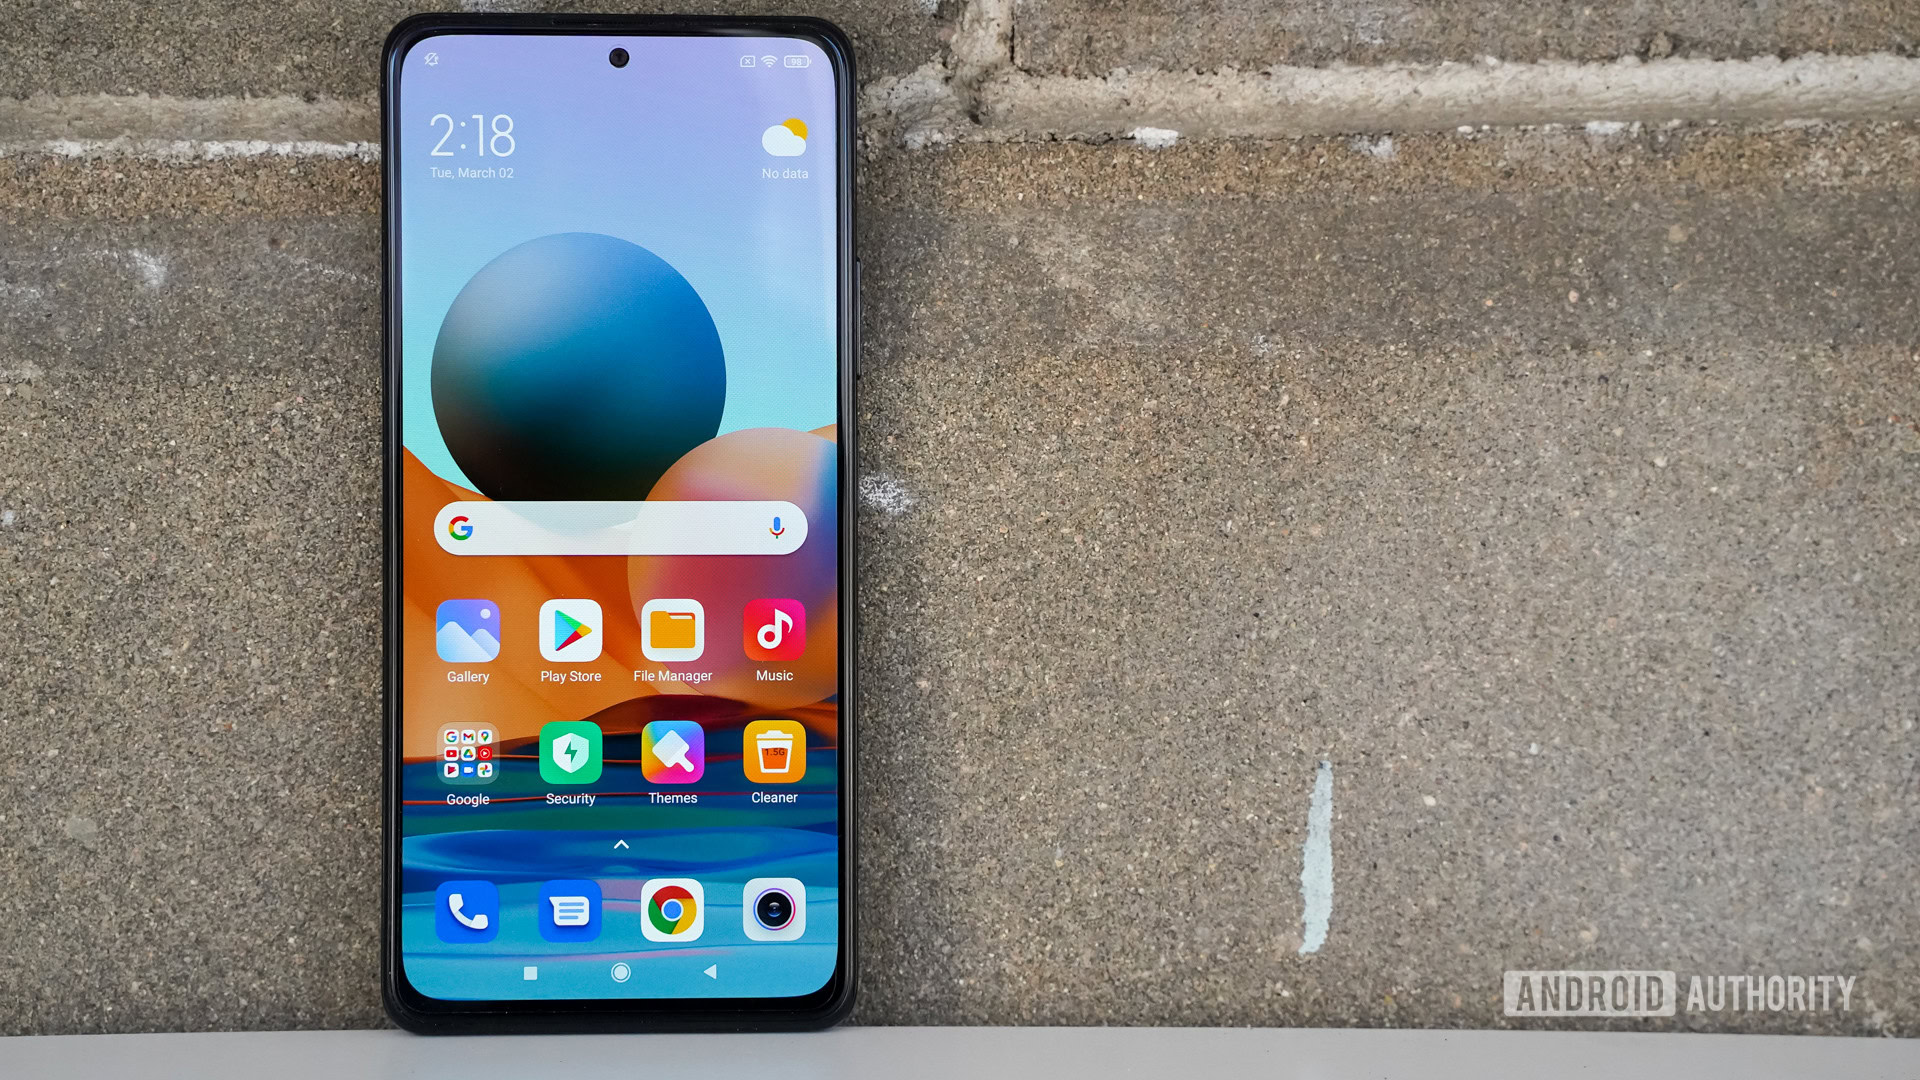 Redmi Note 10 Pro leaning against a brick wall showing the screen.